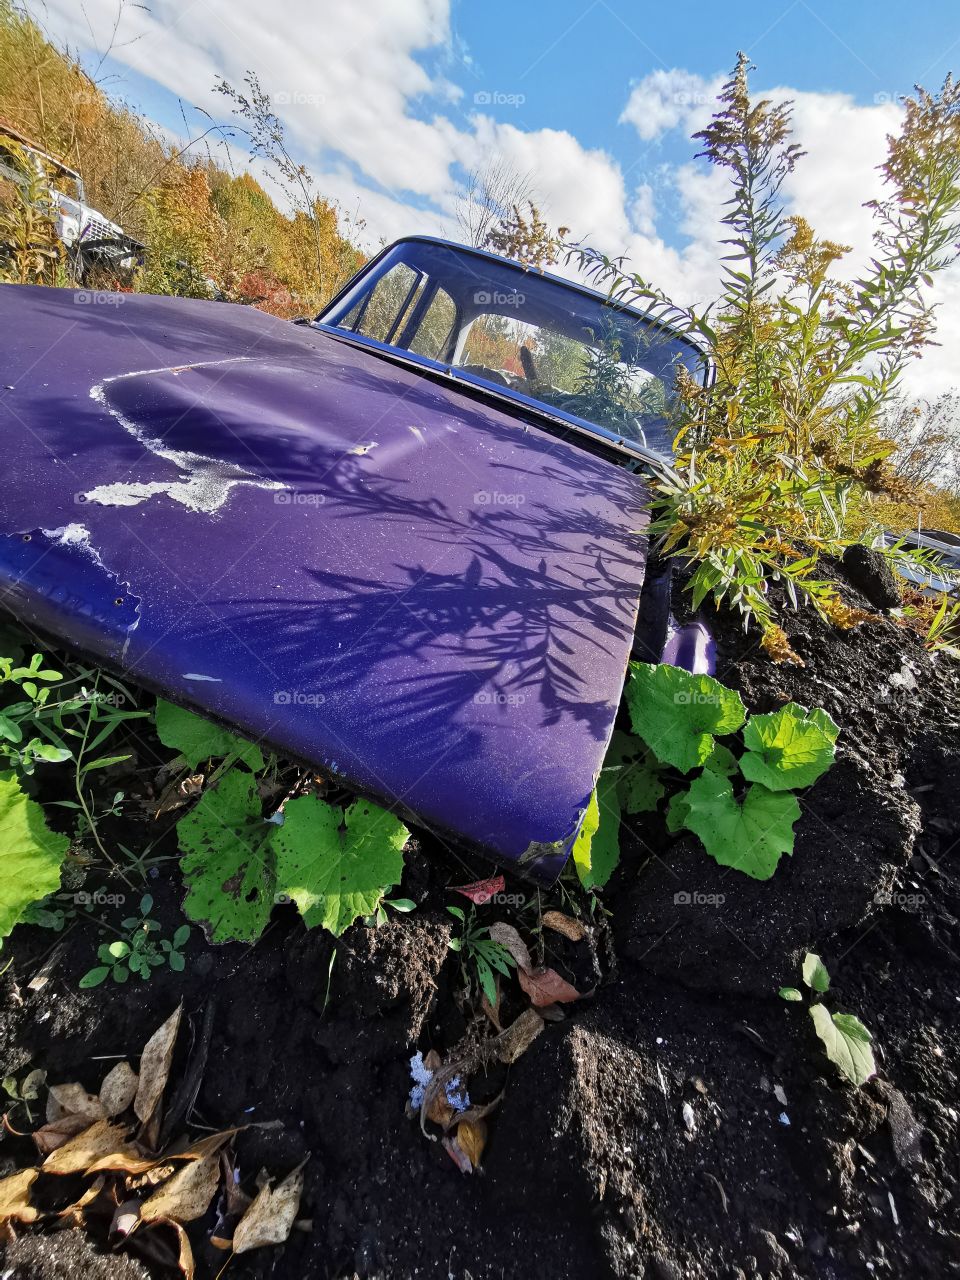 Purple show car found in a scrap yard, half burried under soil, plates growing around and in the car.